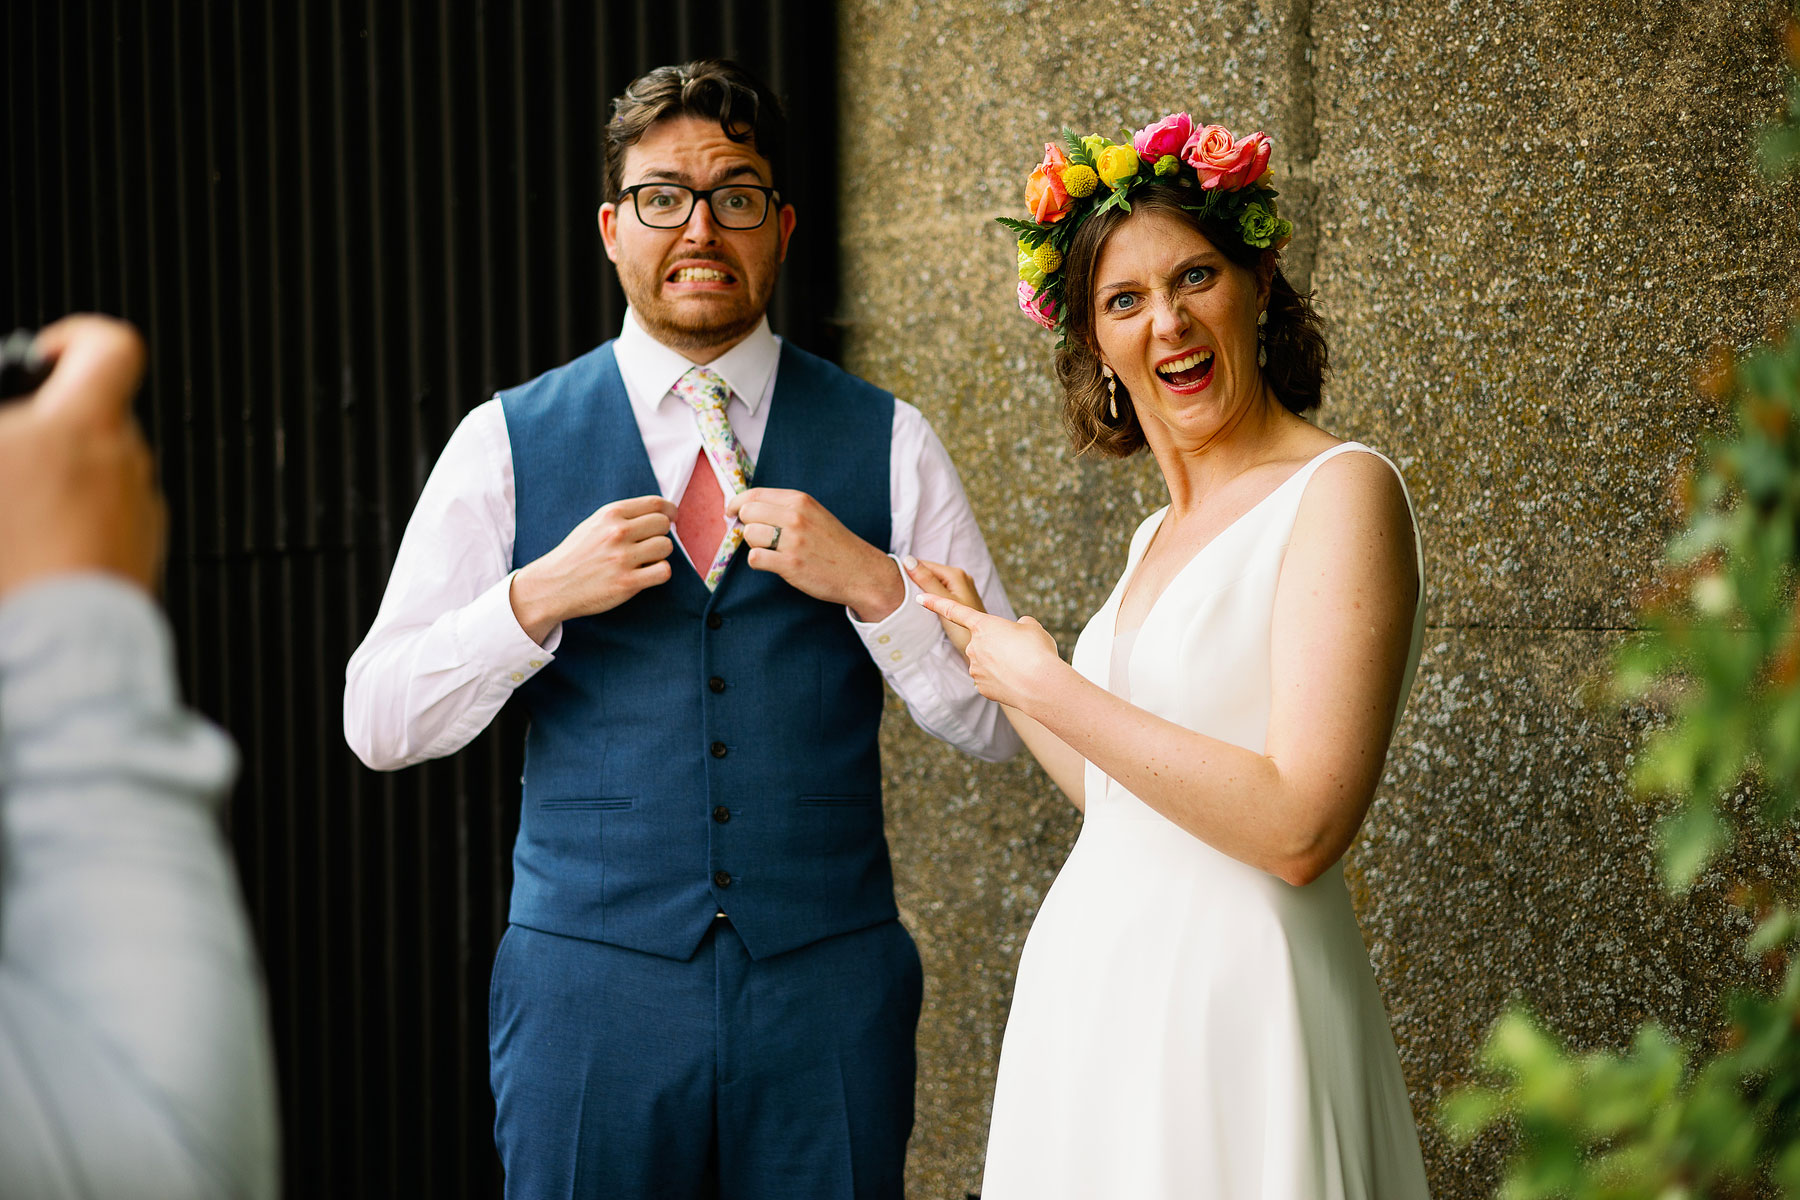 fun and colourful wedding images at a barn wedding in yorkshire